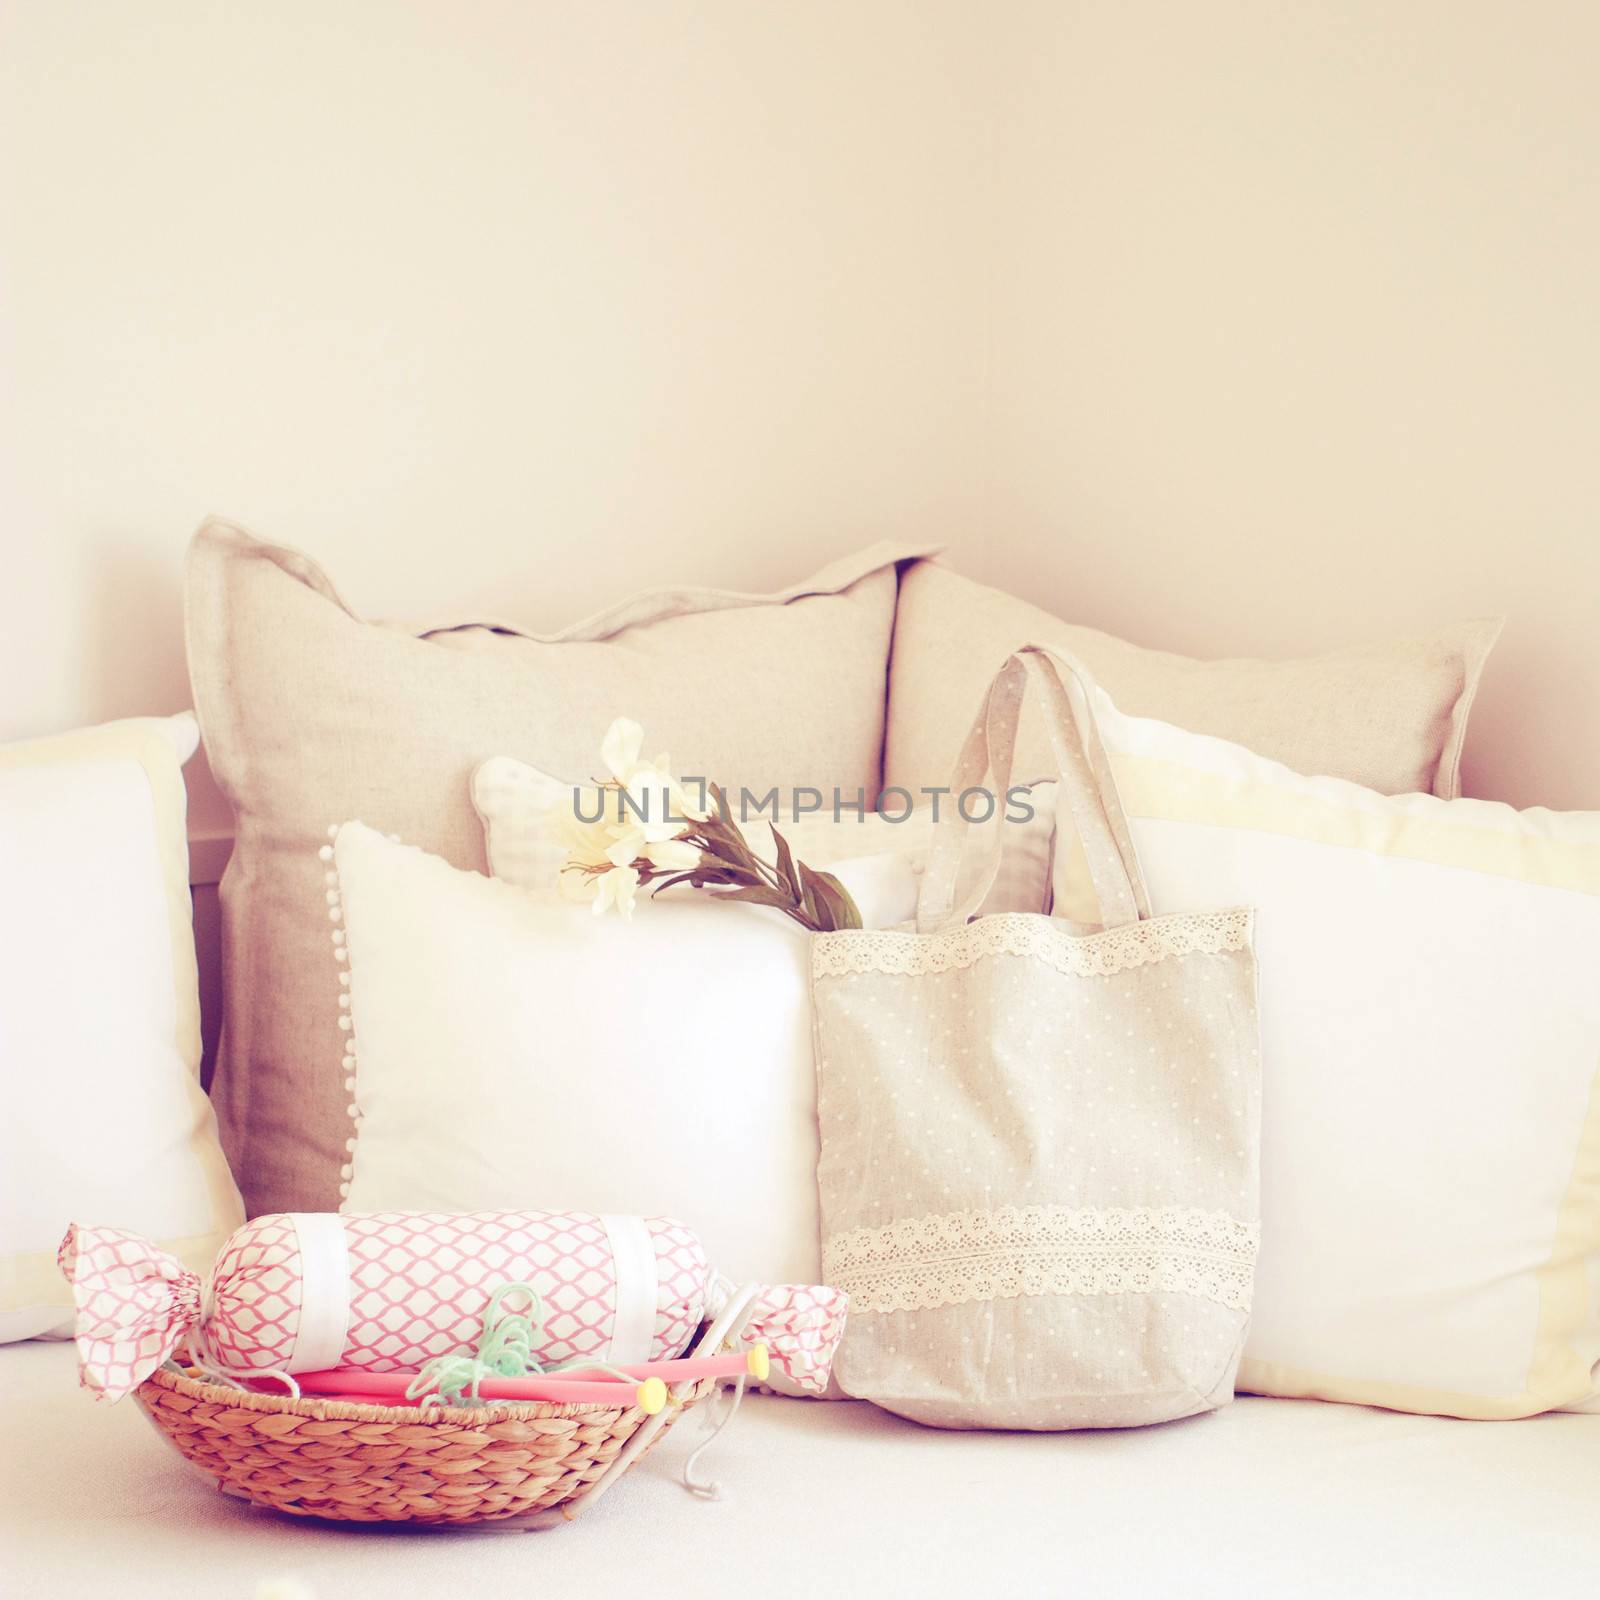 Knitting needles in basket and cute tote bag on the bed with retro filter 